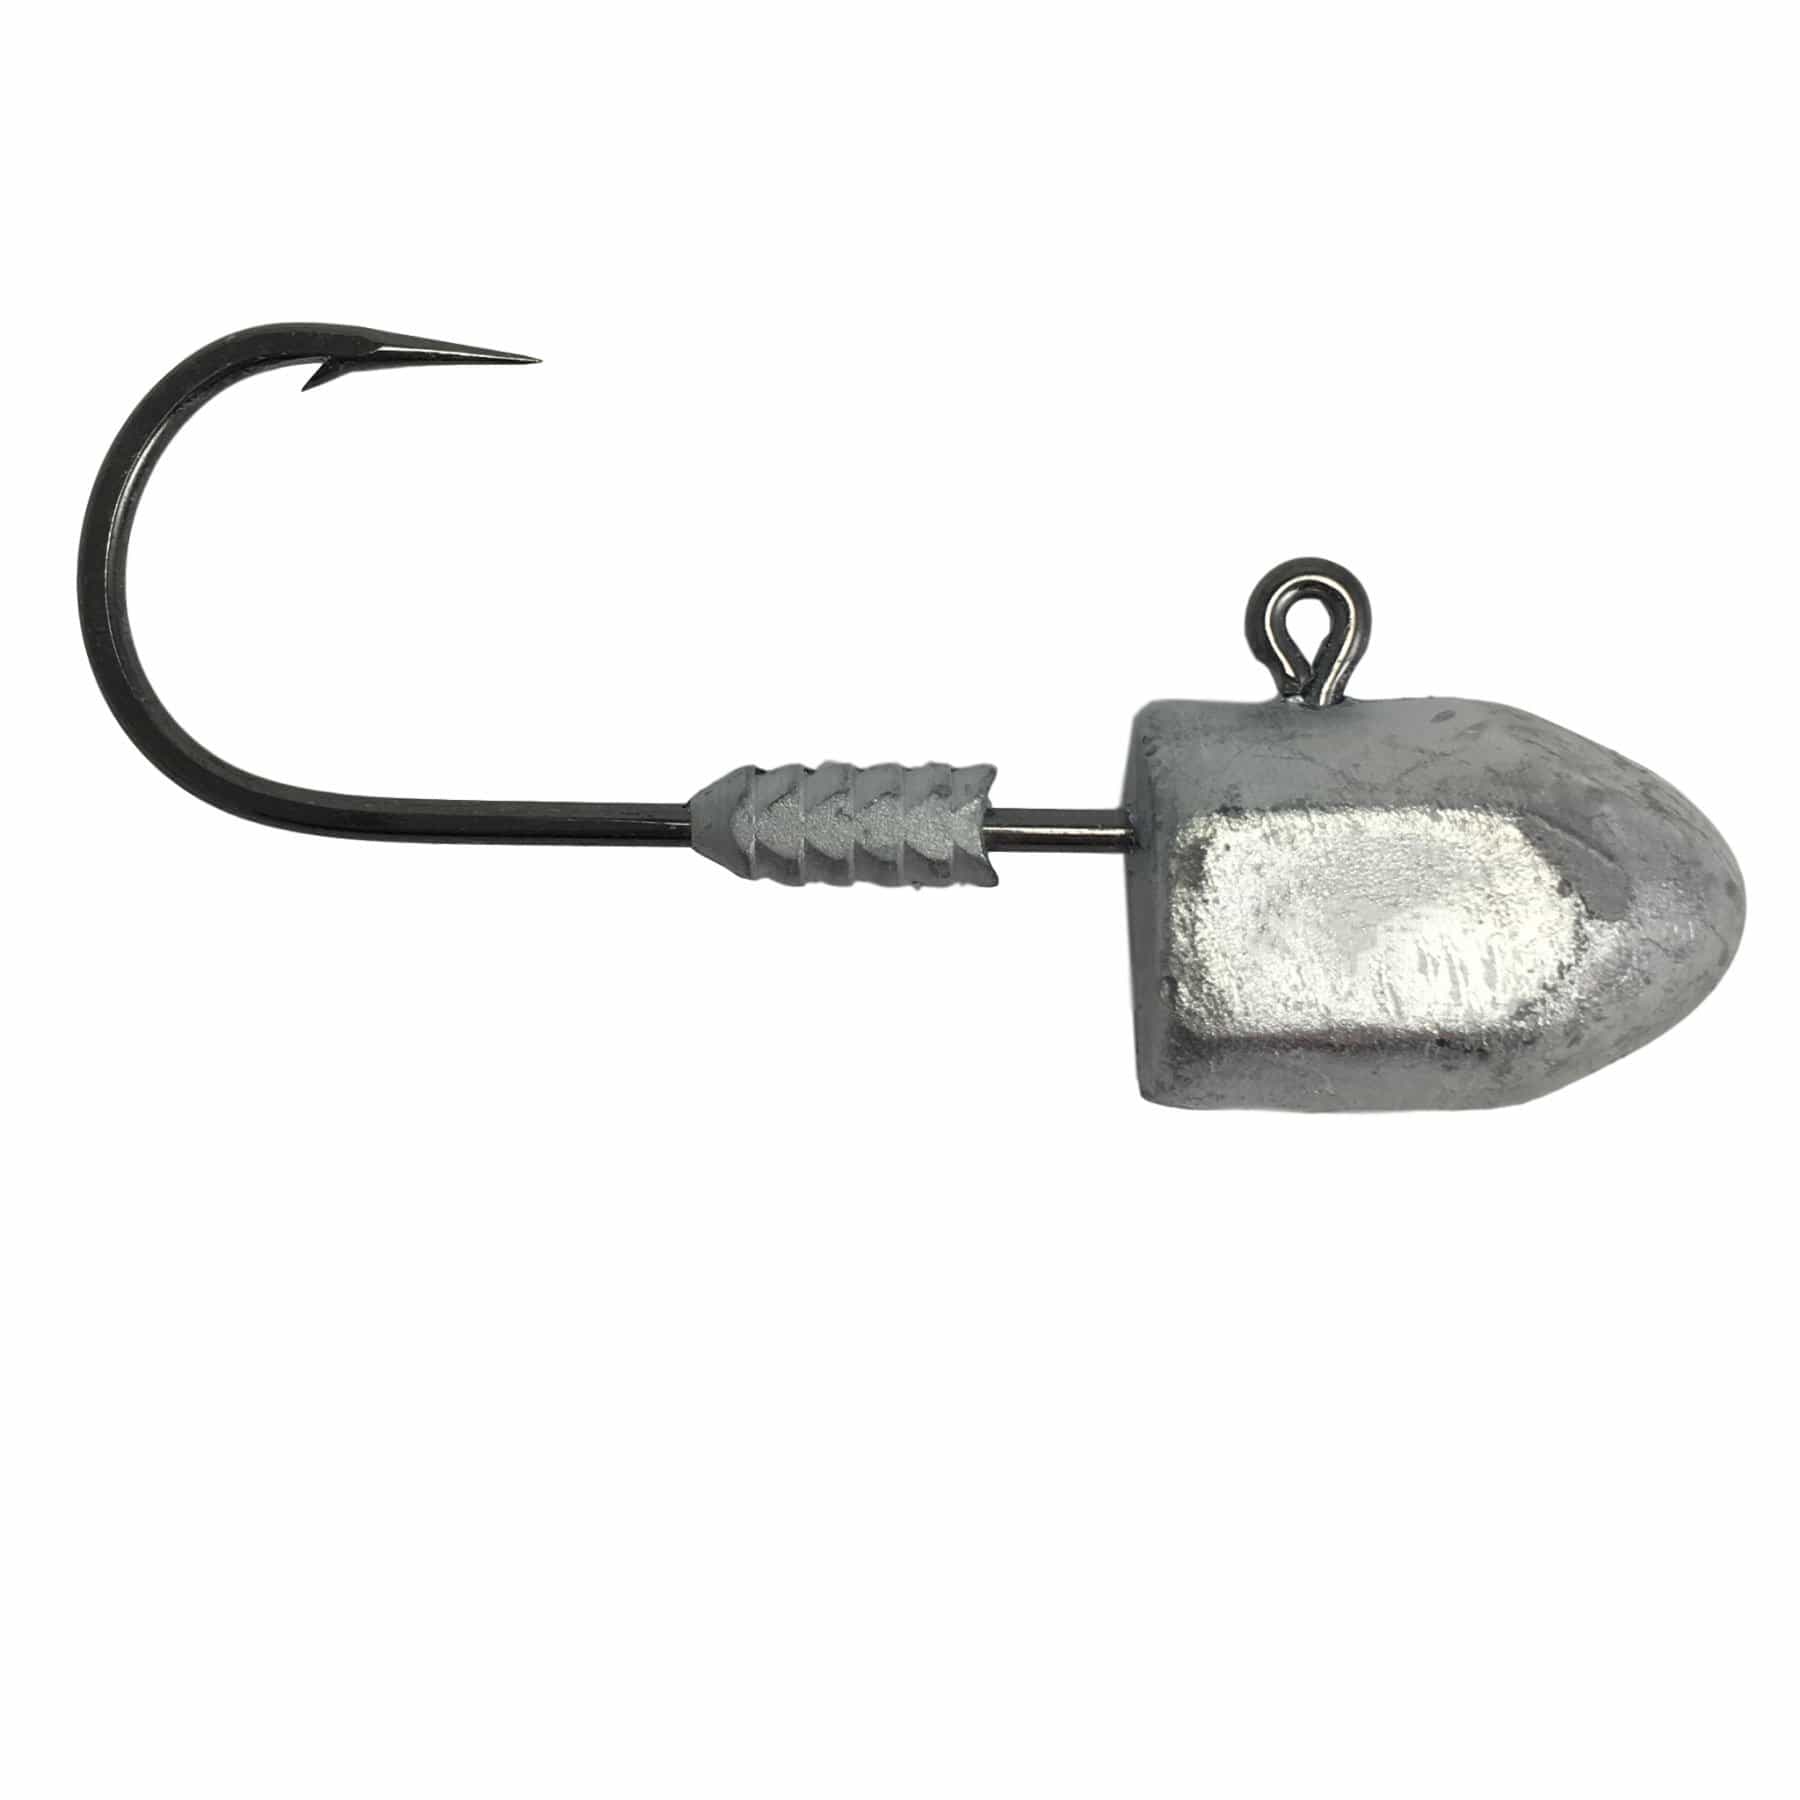 Buy Gamefish Products Online in East End-Long Look at Best Prices